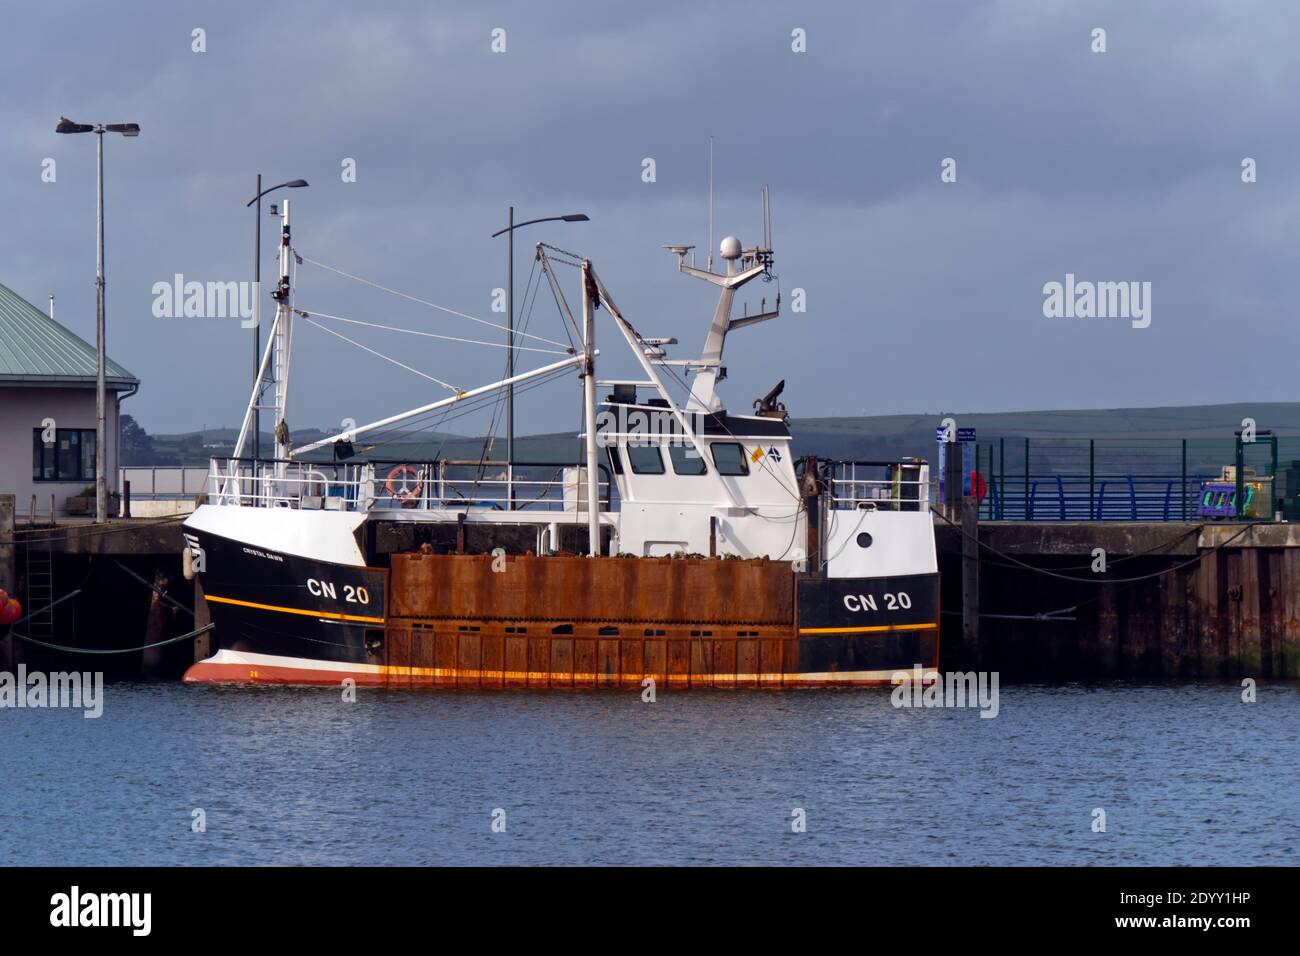 automated scallop trawler Crystal Dawn CN20 in Stranraer Harbour,Dumfries and Galloway, Scotland, UK,GB Stock Photo